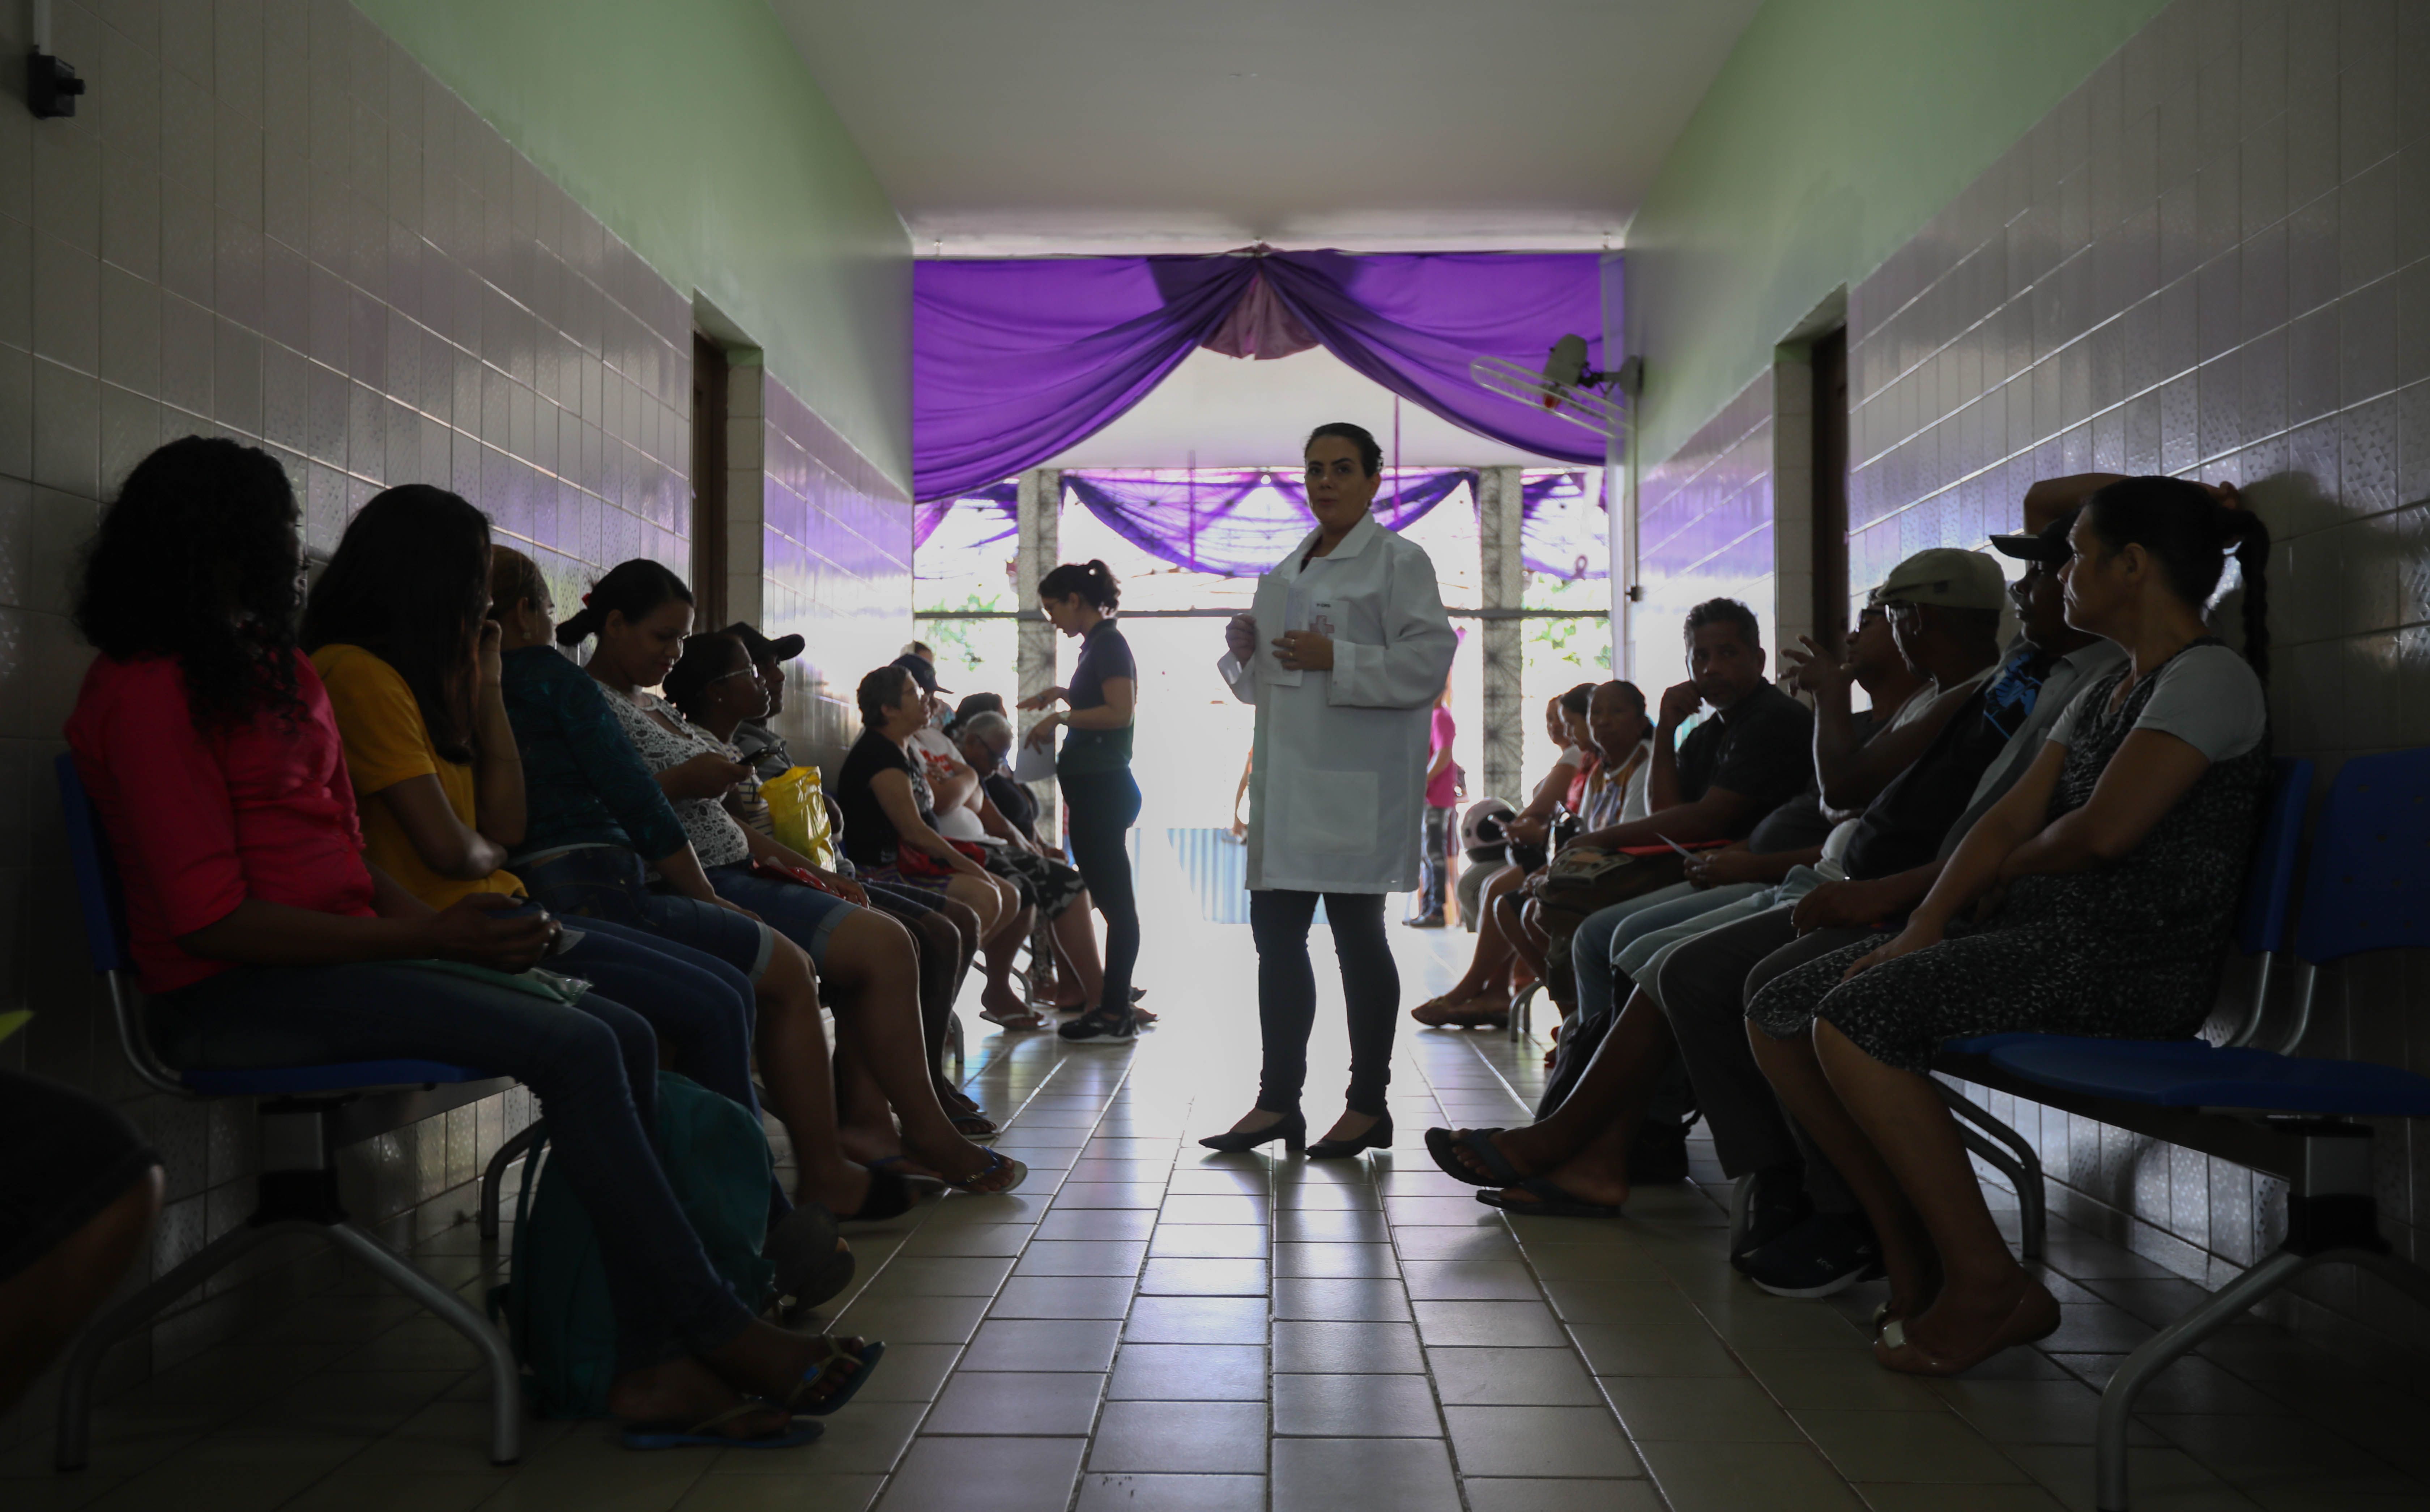 Dozens of people line the hallways of the Center of Dermatology in Marituba during Leprosy Awareness Month in January. Erika Jorge, a member of the Laboratory of Dermatology-Immunology, is in charge of shepherding patients from corridors to examination rooms. Image by Anton L. Delgado. Brazil, 2020.